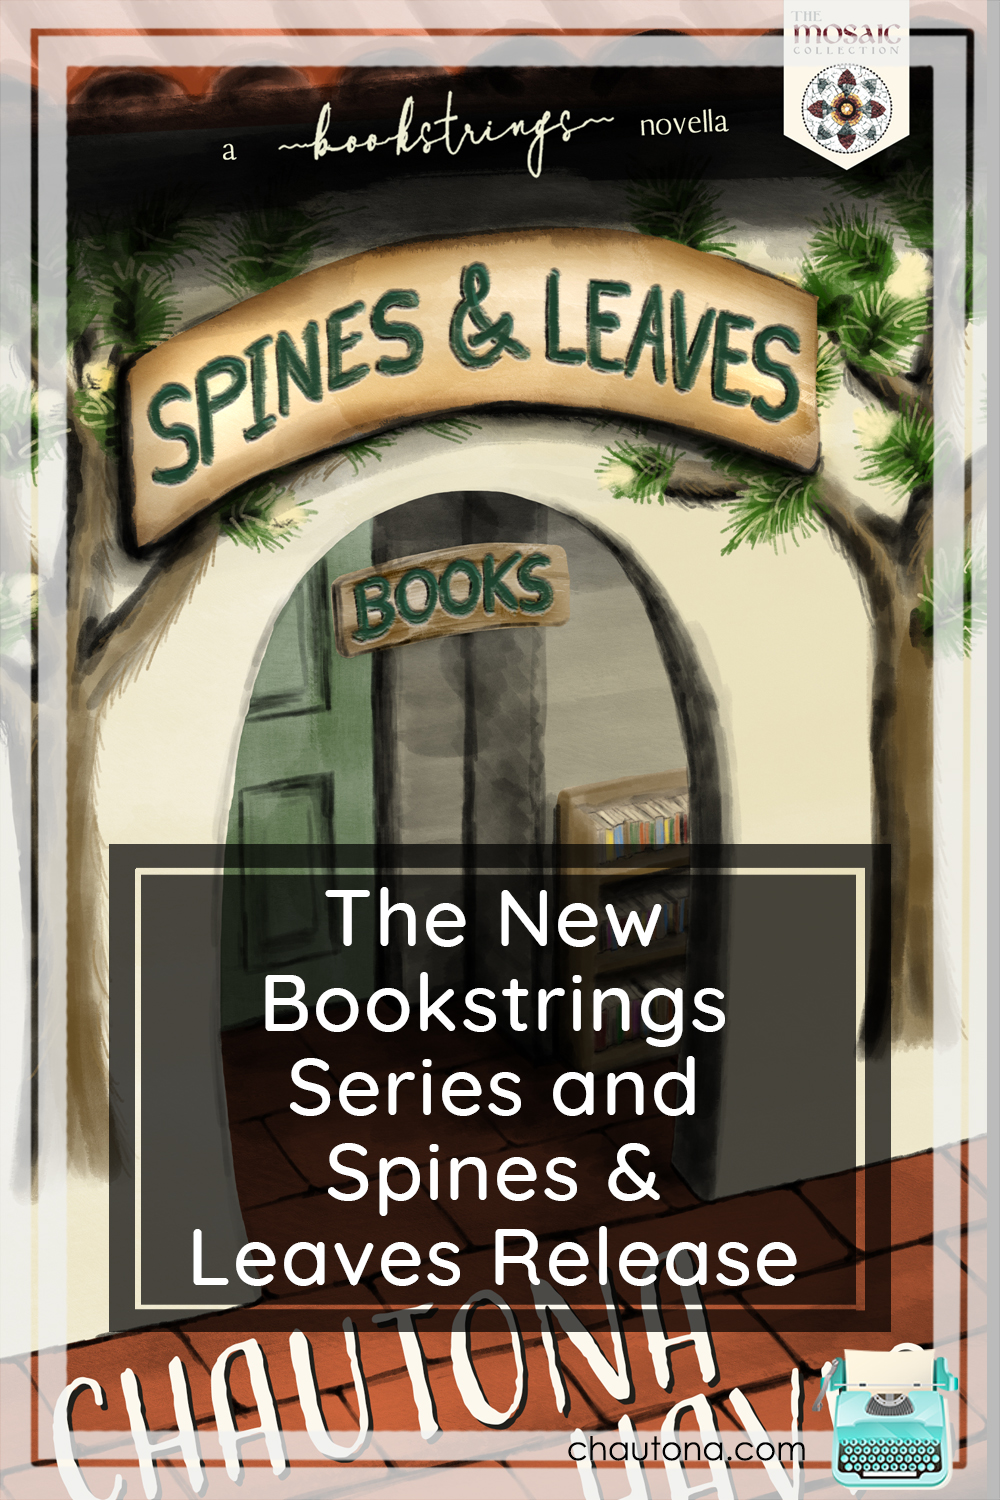 Spines & Leaves Release